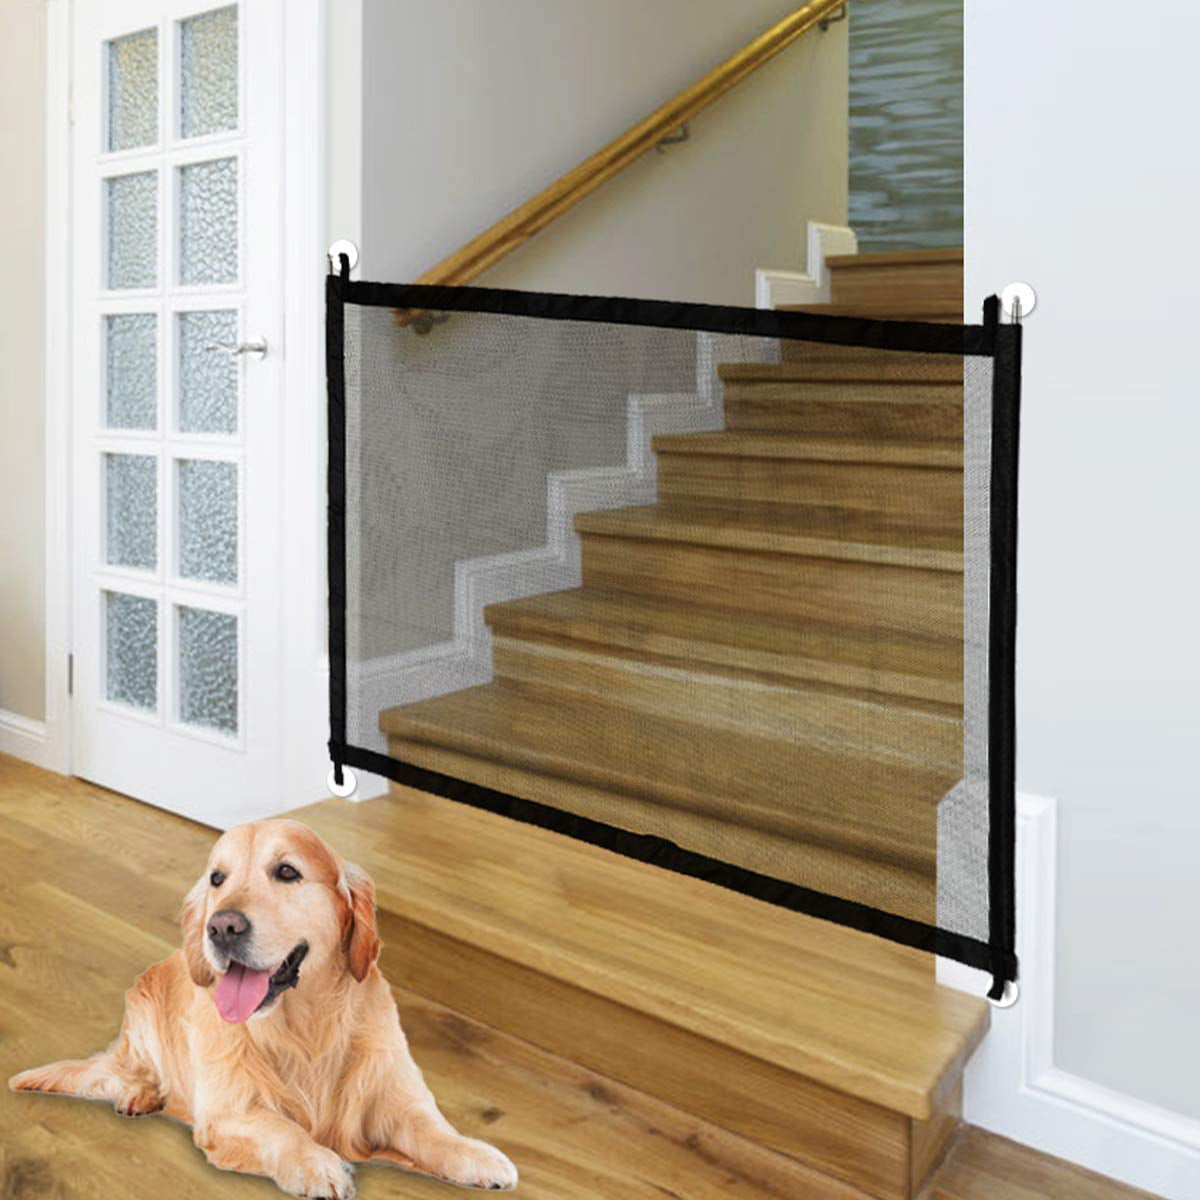 Baby Pet Safety Stair Gate Child Relocatable Safety Gates OZZlOR Magic Gate for Dogs Black，110*72cm Portable Folding Door Mesh Magic Gate Fence Isolated Indoor and Outdoor with 4 Adhesive Hooks